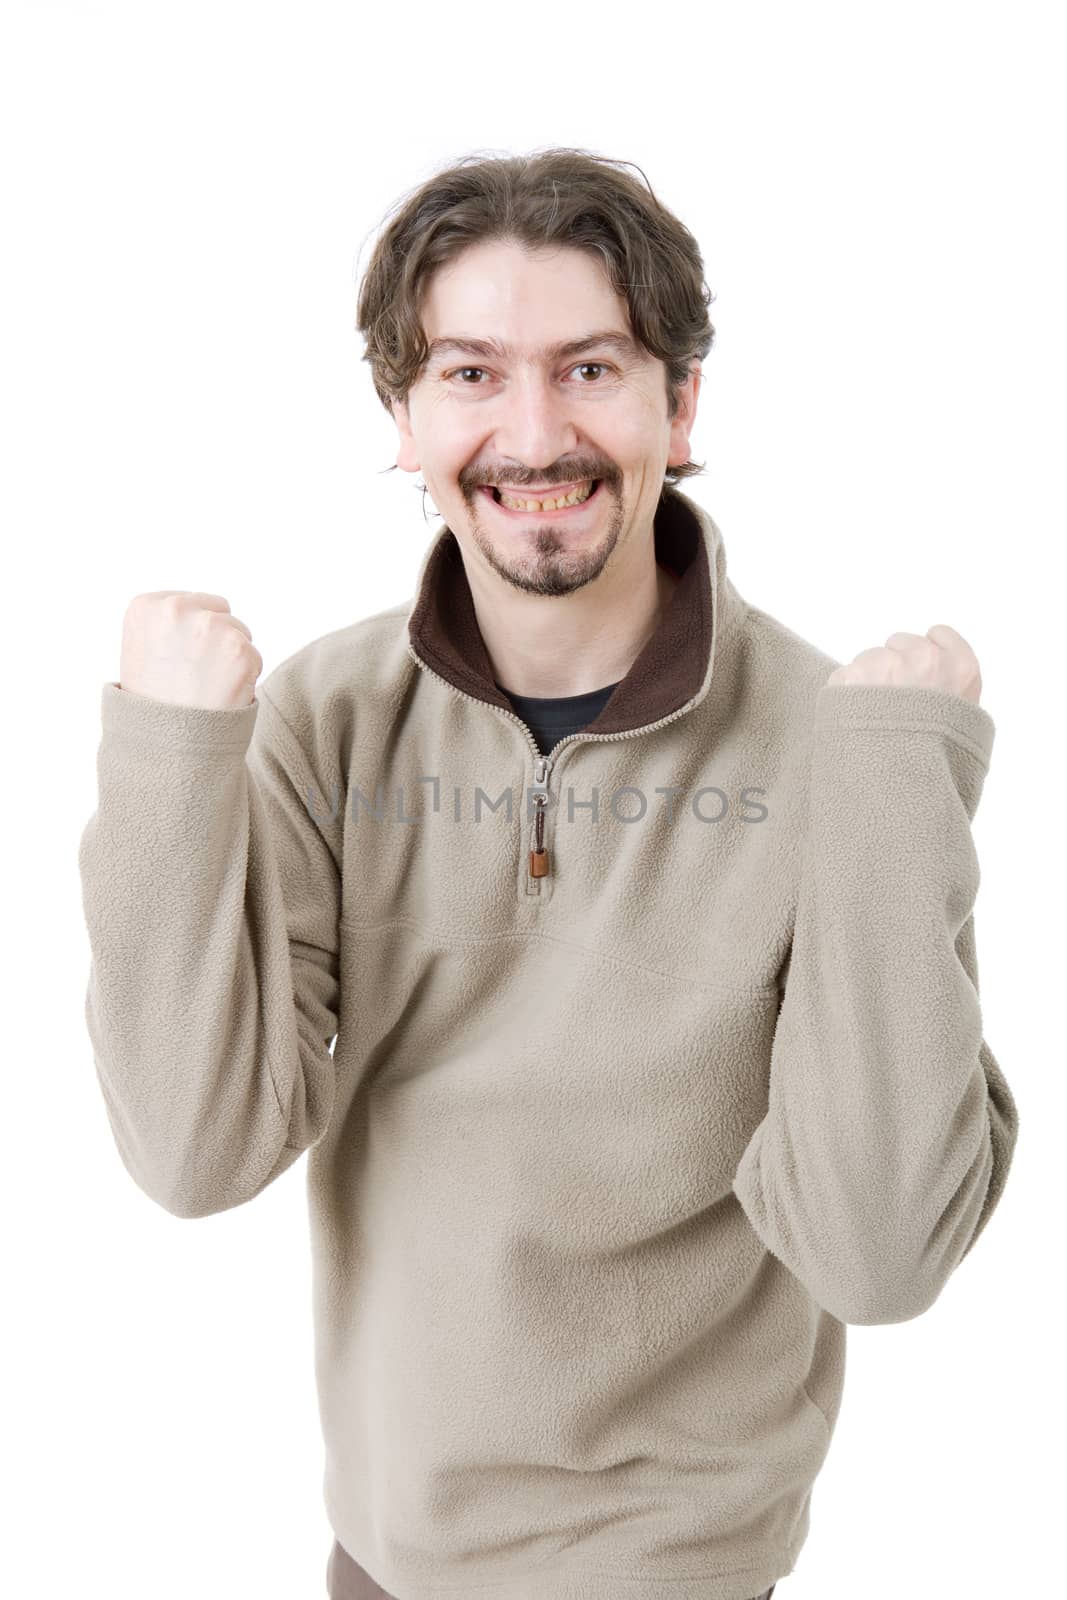 happy young man winning, isolated on white